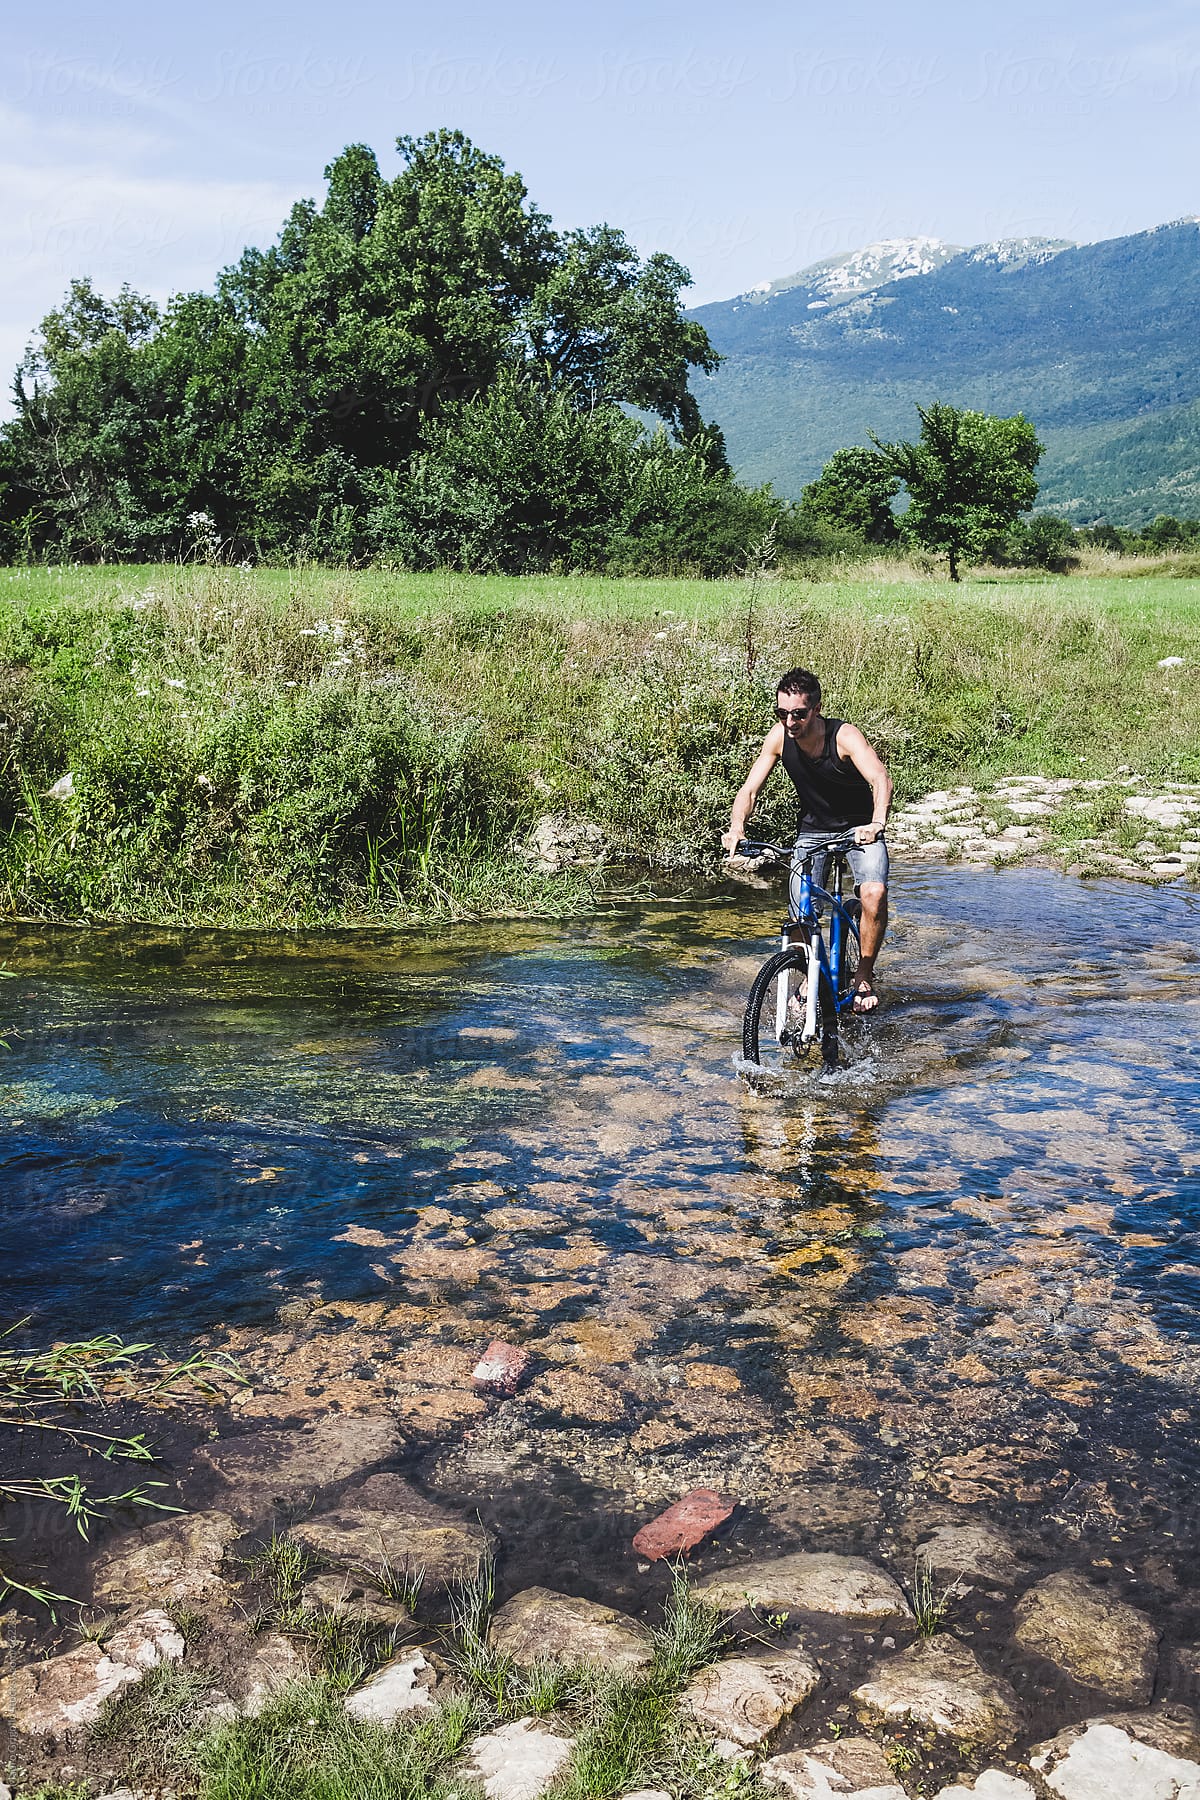 A Man crossing the river with a mountain bike